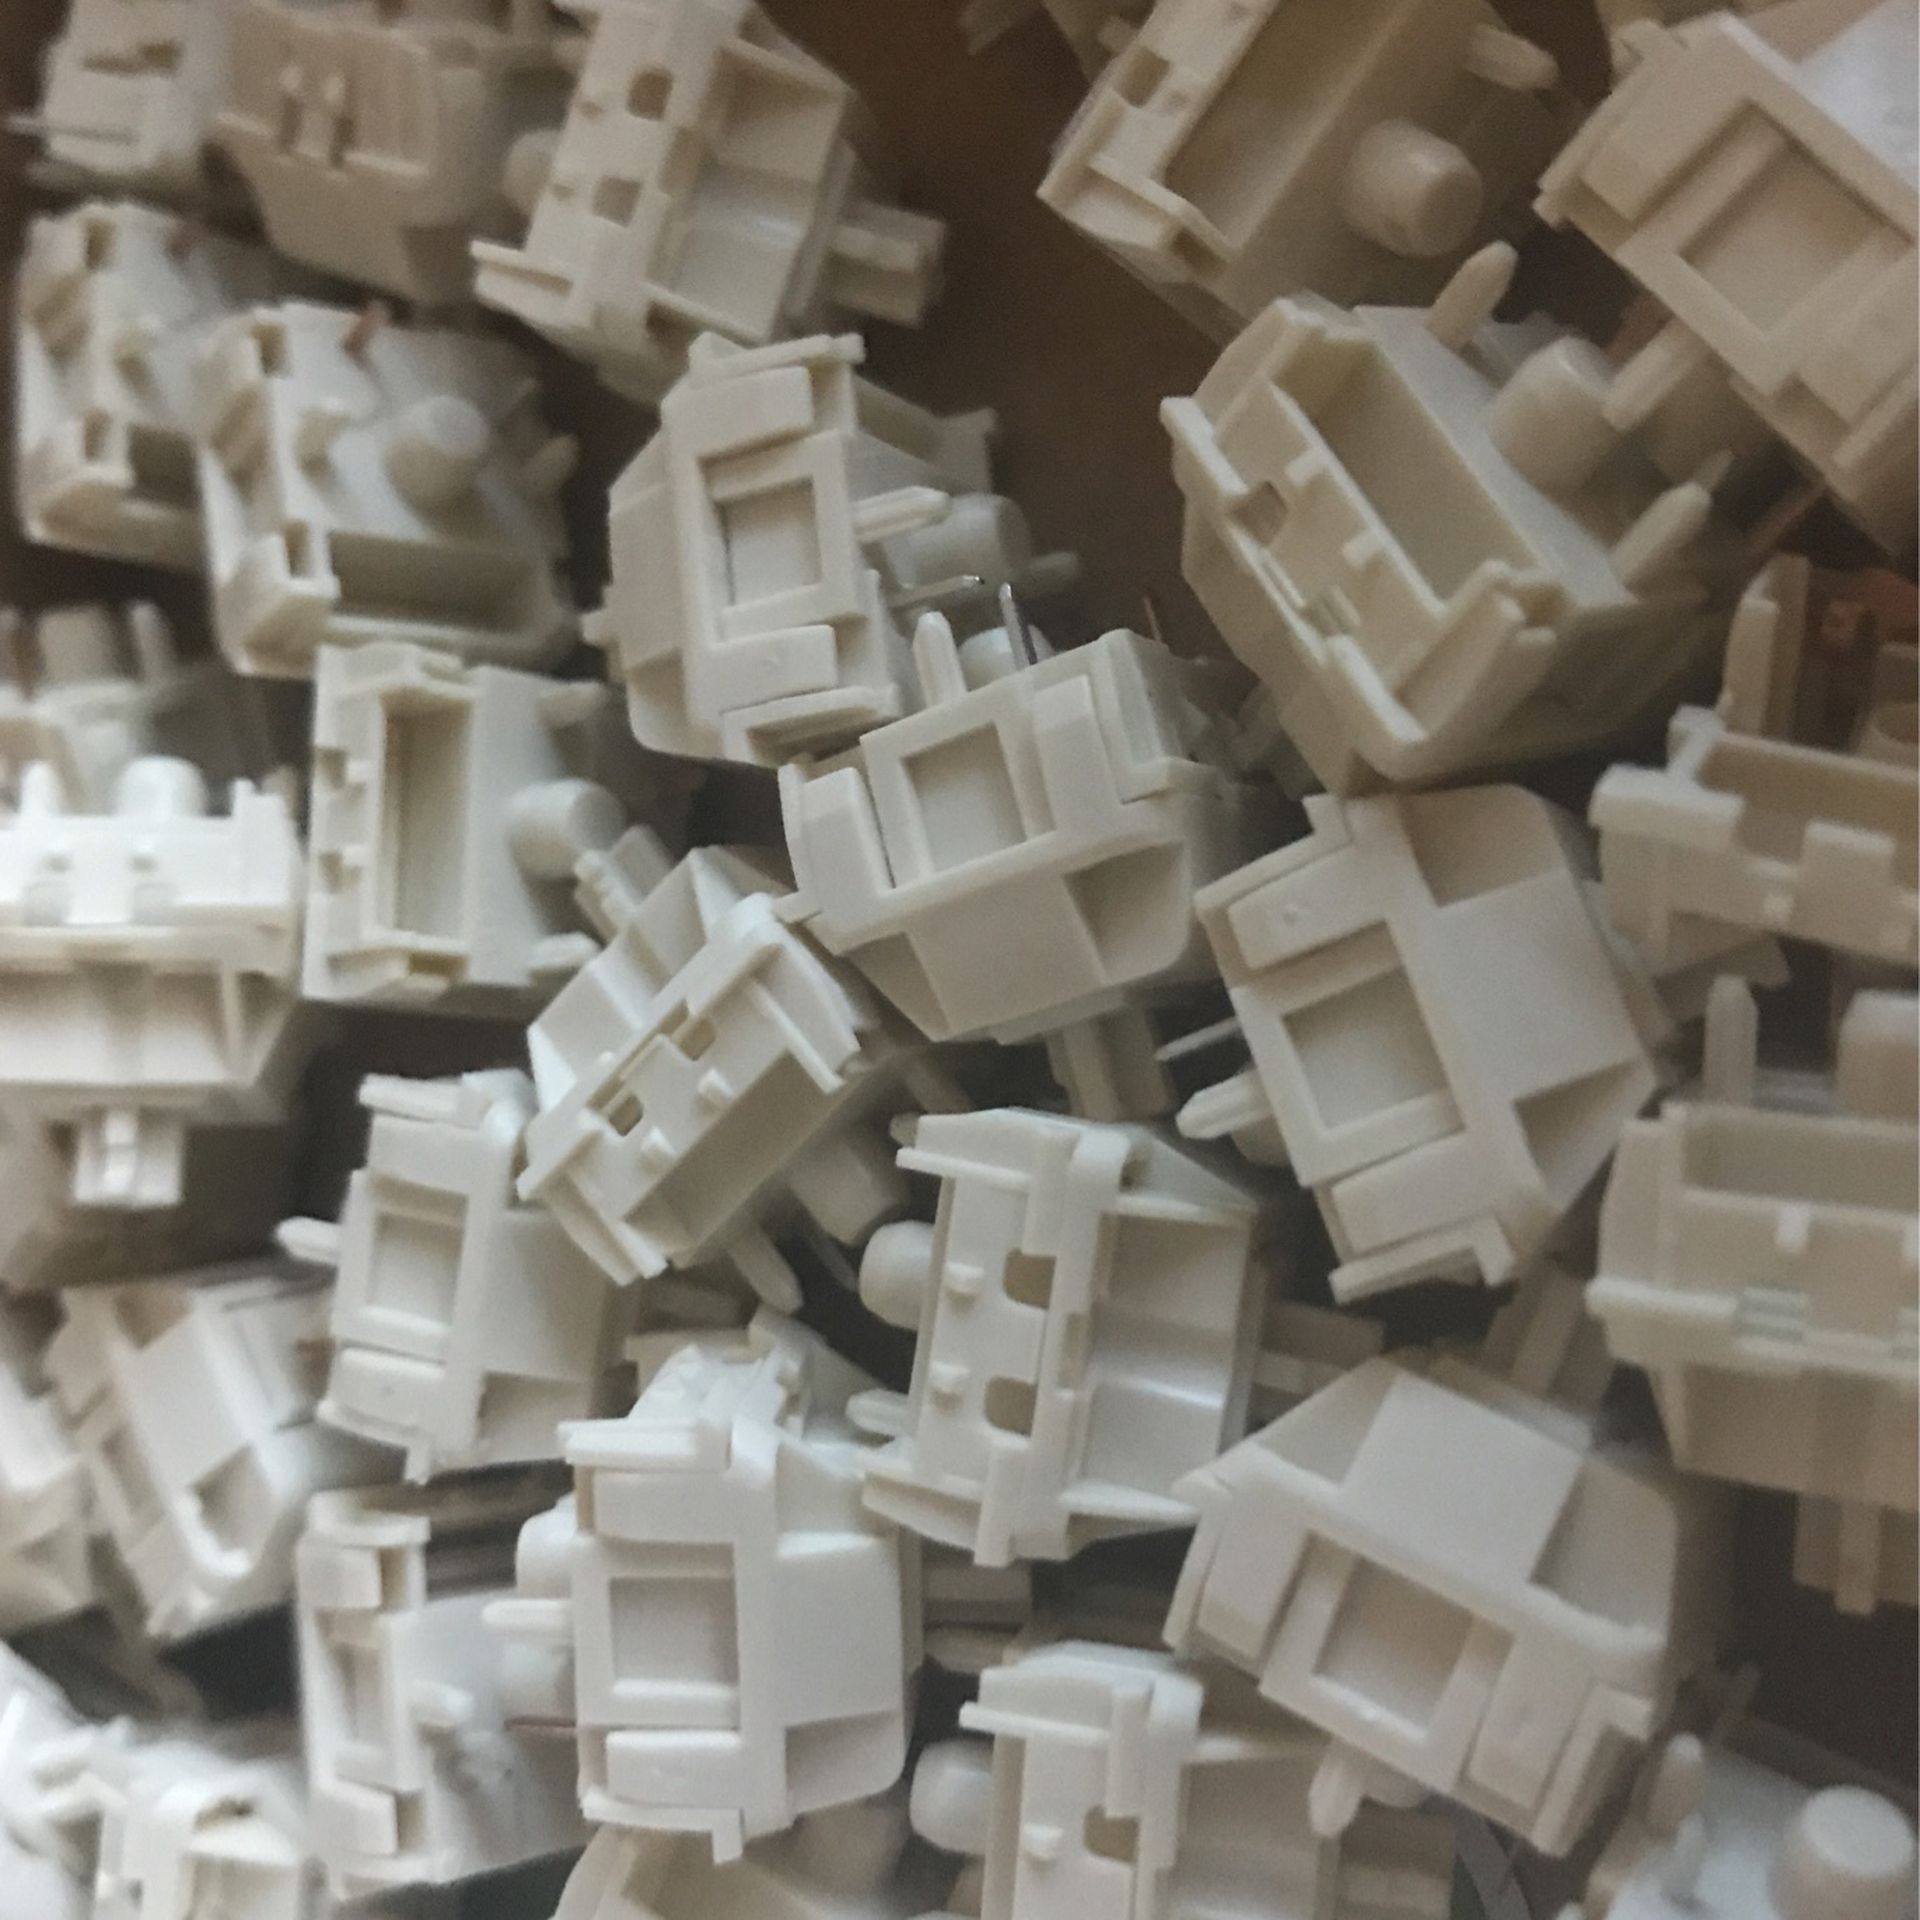 Lubed Novelkey Cream Switches (70) Pickup Or Ship